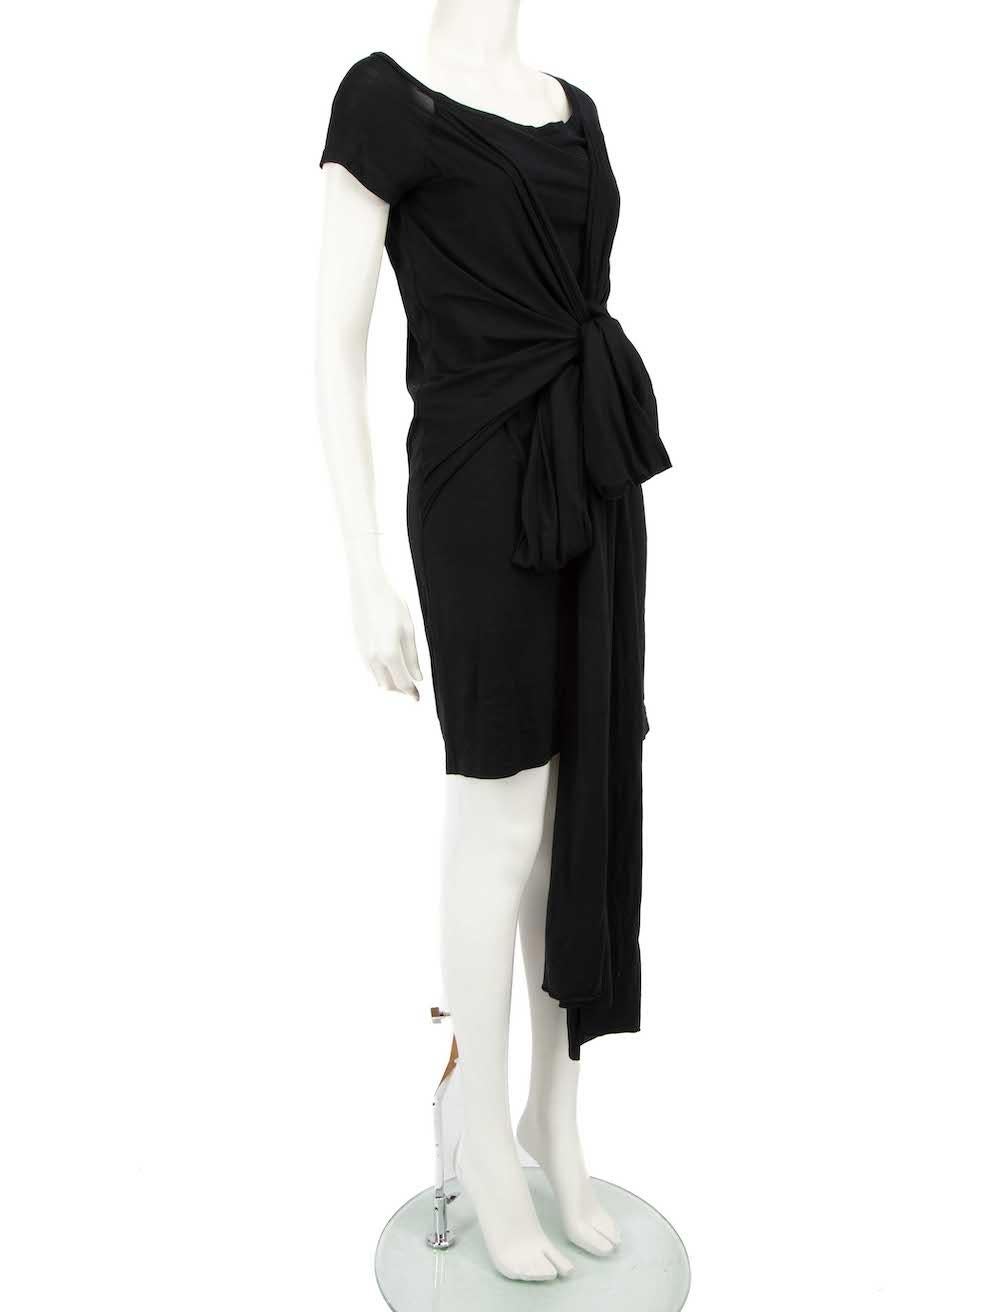 CONDITION is Very good. Hardly any visible wear to top is evident on this used Yves Saint Laurent designer resale item.
 
 
 
 Details
 
 
 Black
 
 Cotton
 
 Dress
 
 Mini
 
 Round neck
 
 Tie detail
 
 Figure hugging fit
 
 
 
 
 
 Made in Italy
